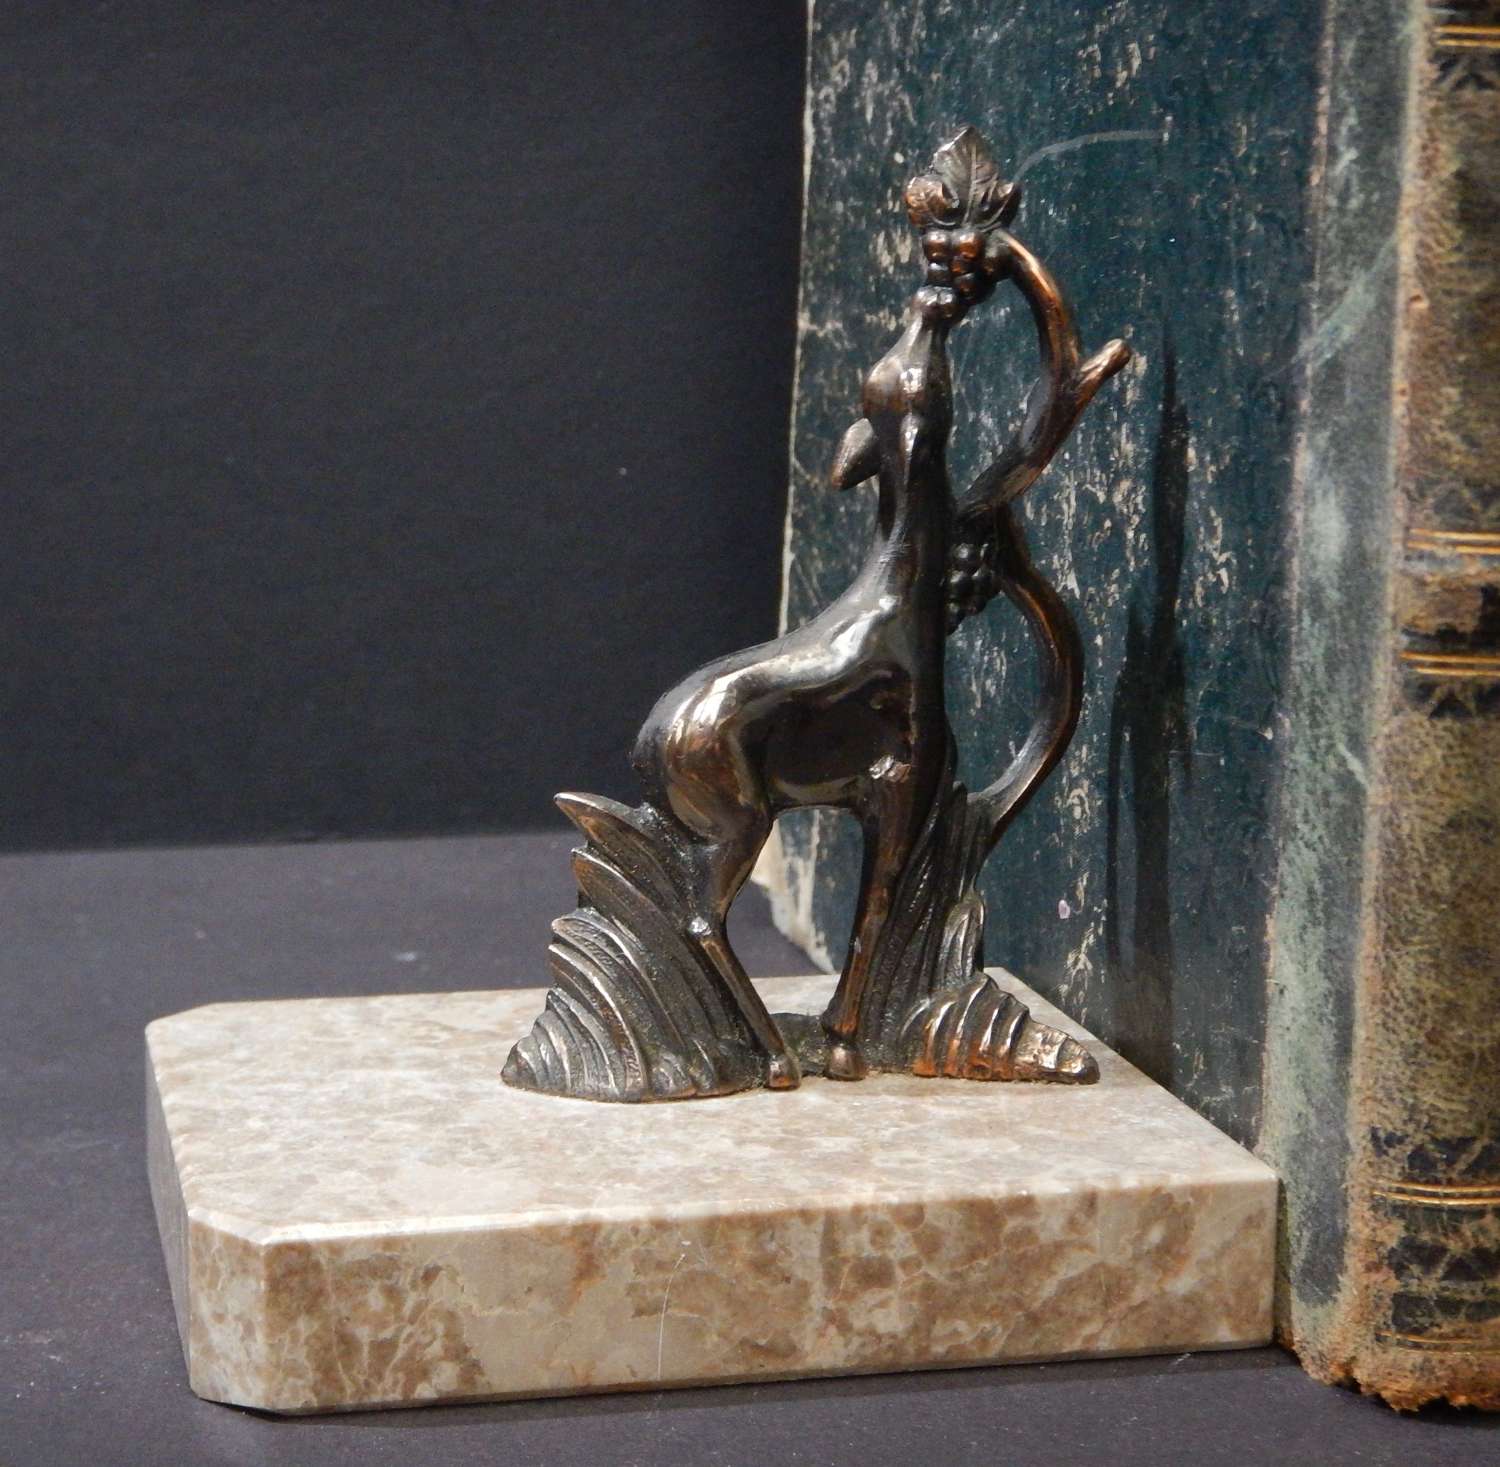 RESERVED French Bookends - Deer Stealing from the Grape Vines